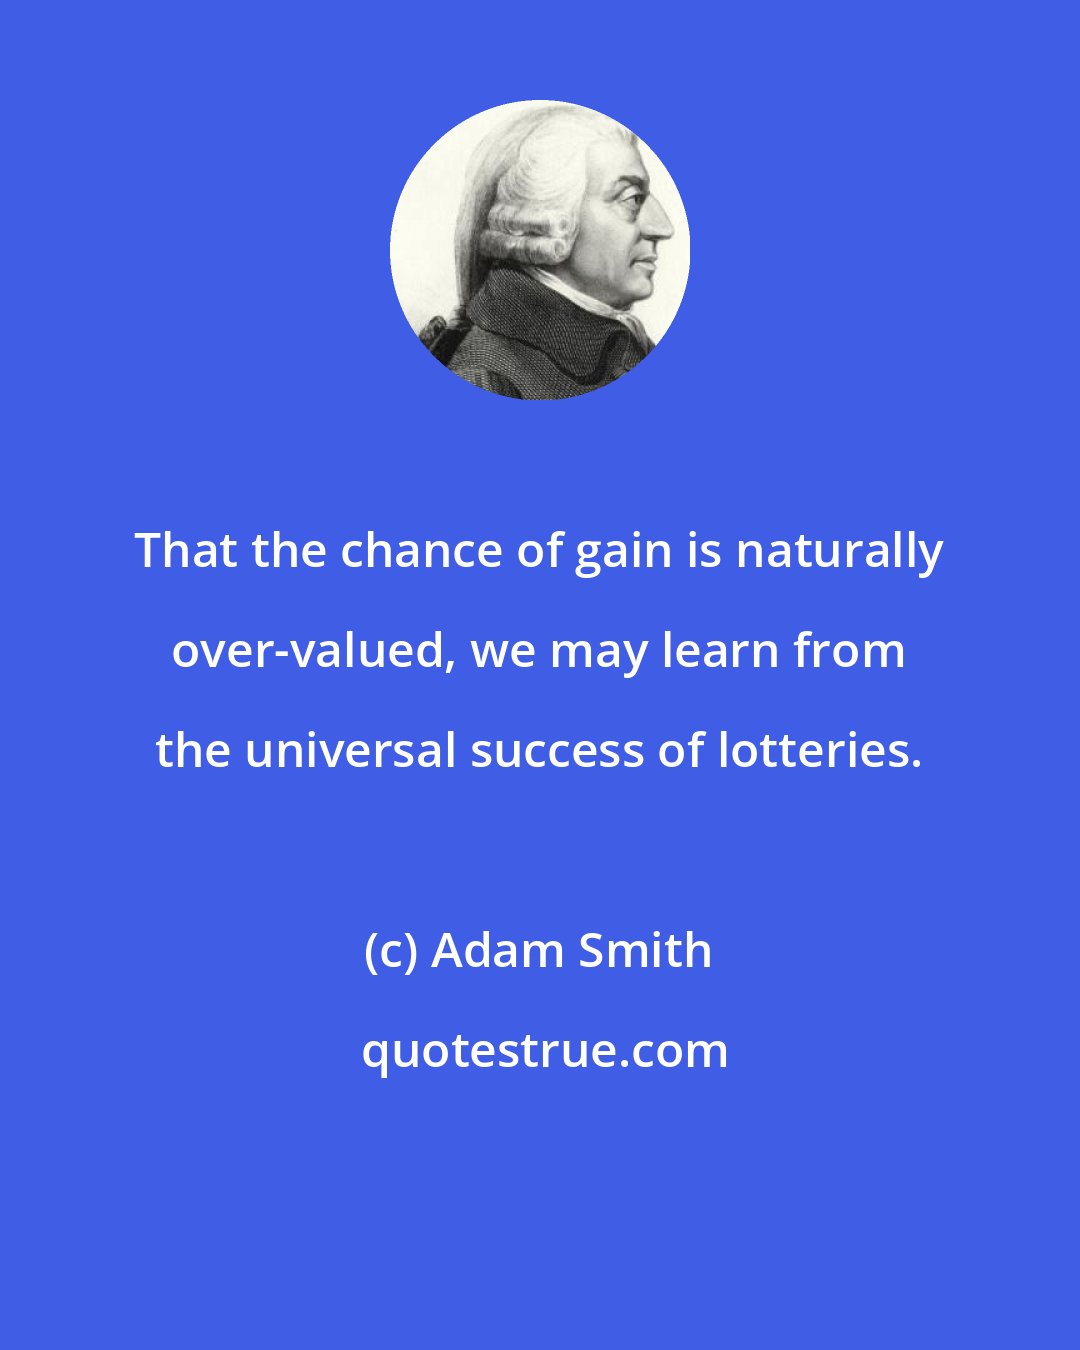 Adam Smith: That the chance of gain is naturally over-valued, we may learn from the universal success of lotteries.